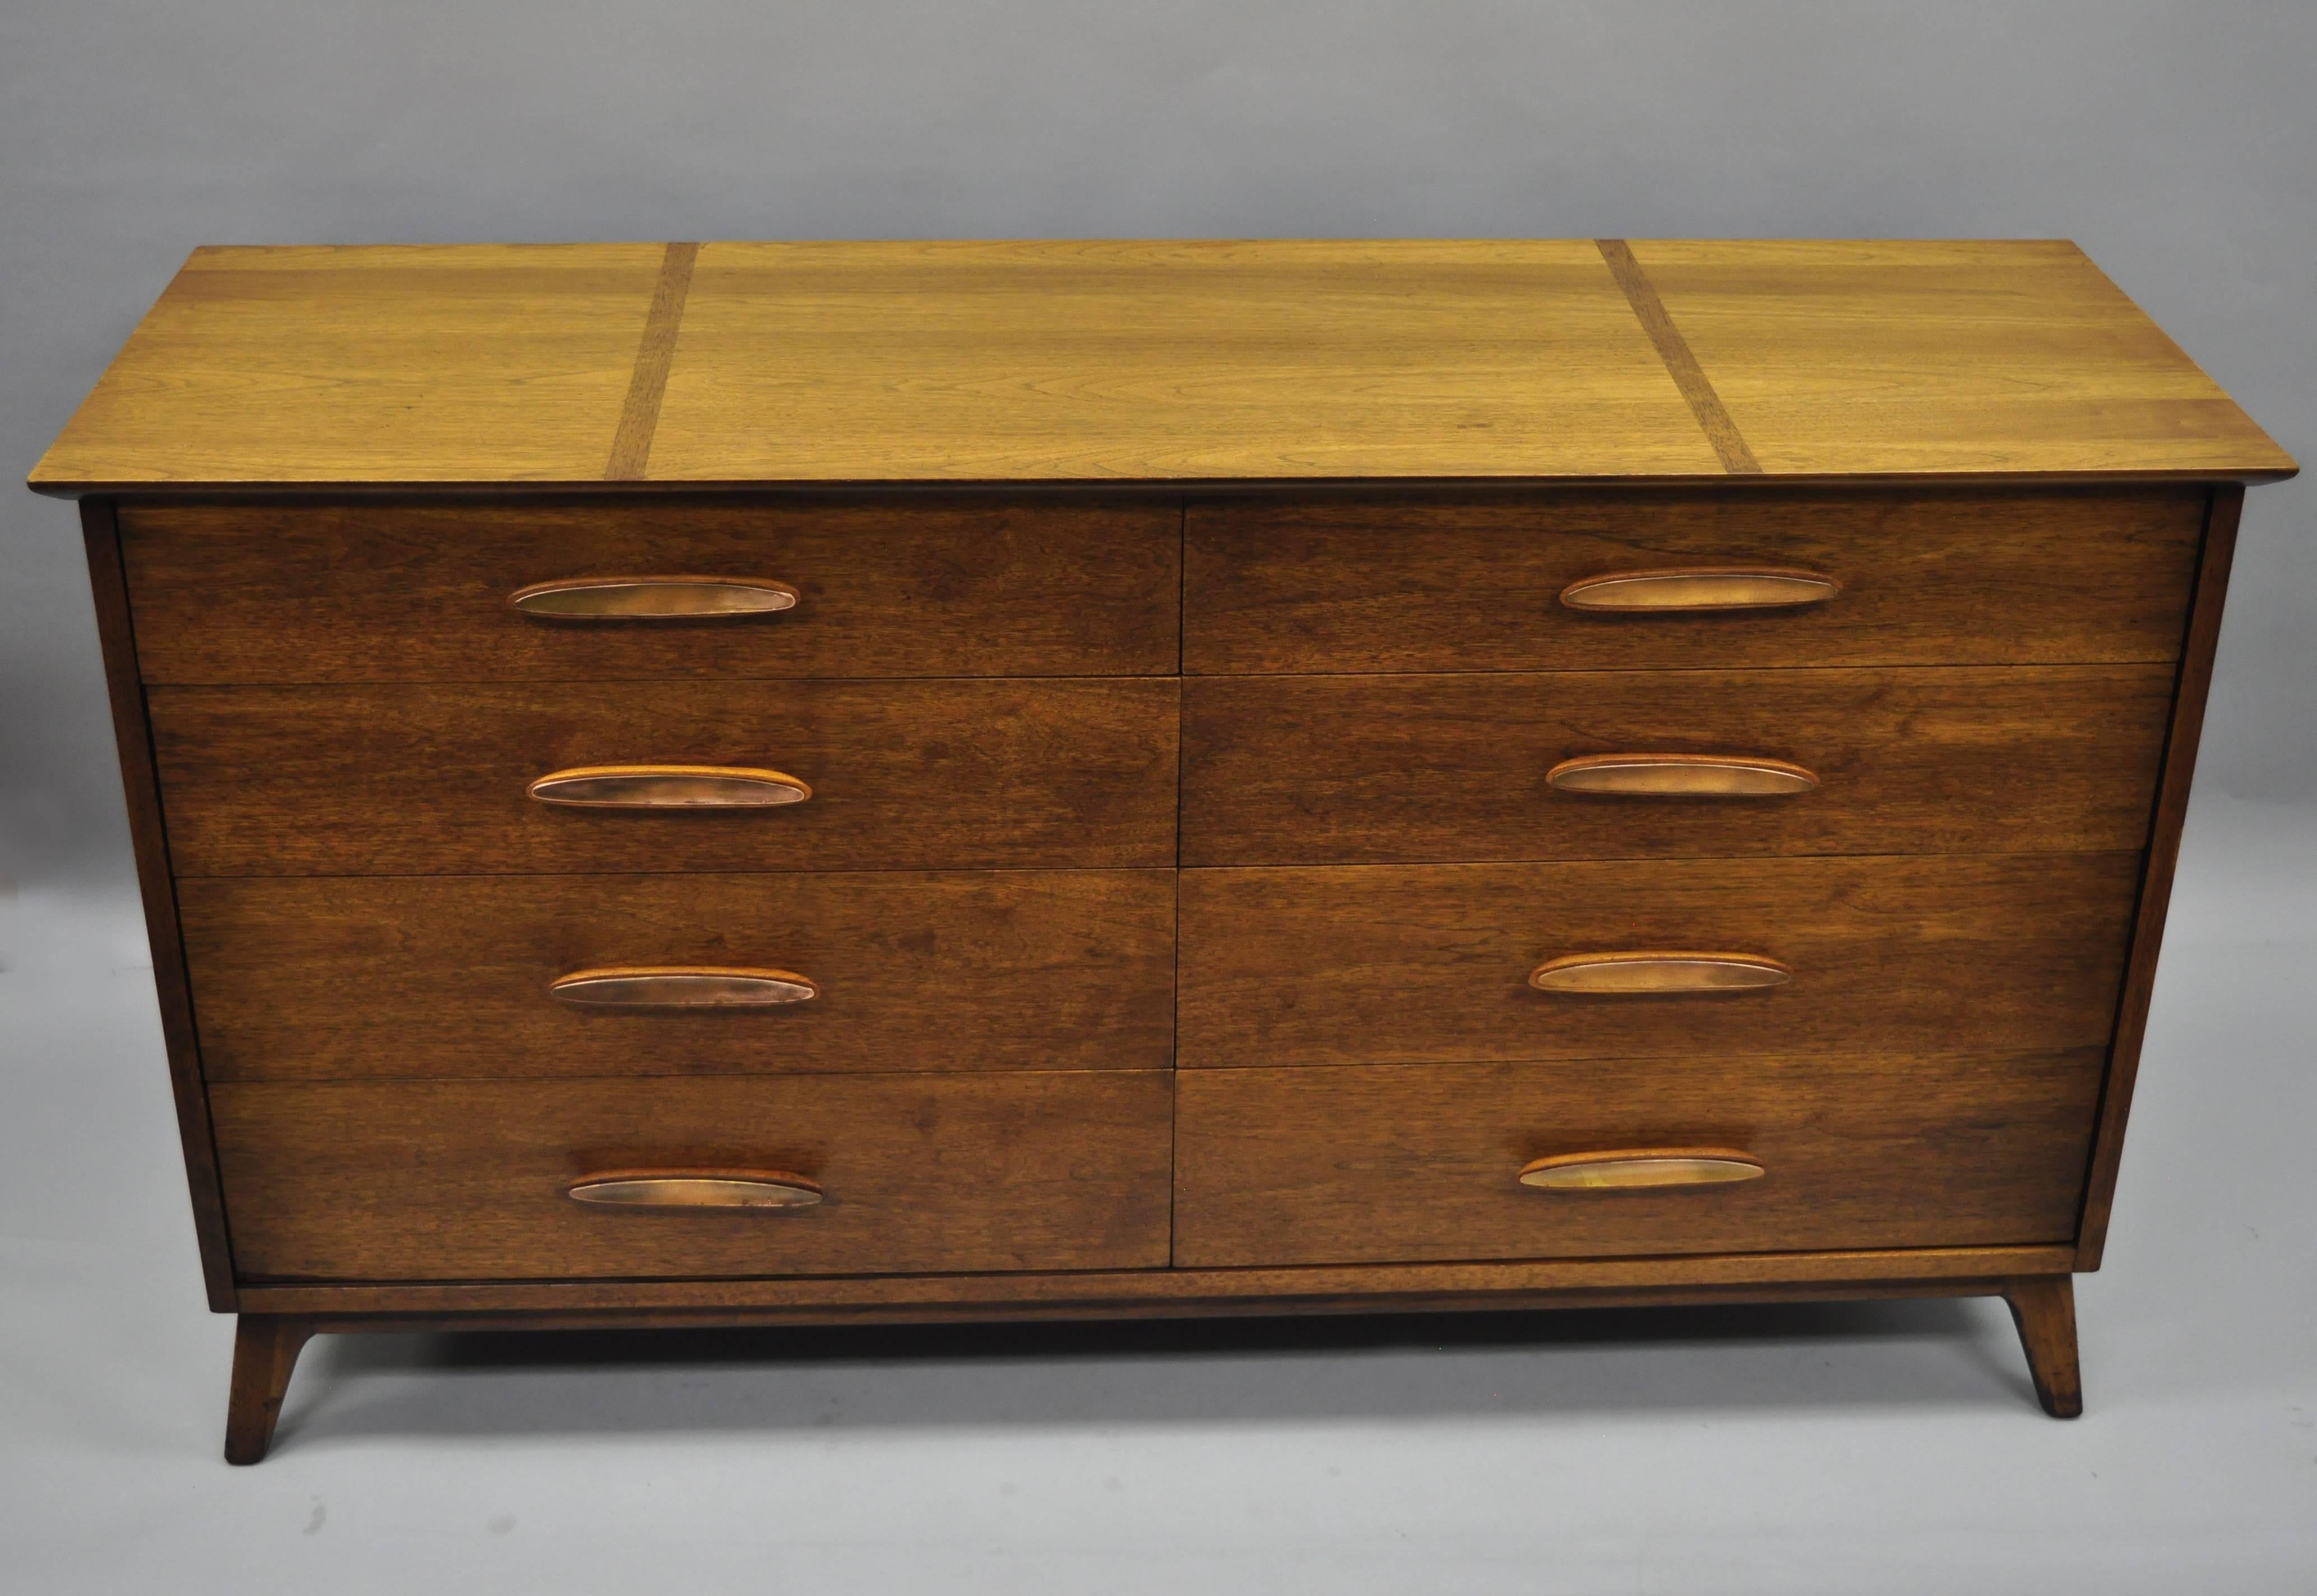 Vintage Heritage Henredon walnut Mid-Century Modern long dresser. Item features an inlaid wooden top, unique sculpted walnut pulls with burnished brass accents, beautiful wood grain, original label, five dovetailed drawers, circa 1960. Measurements: